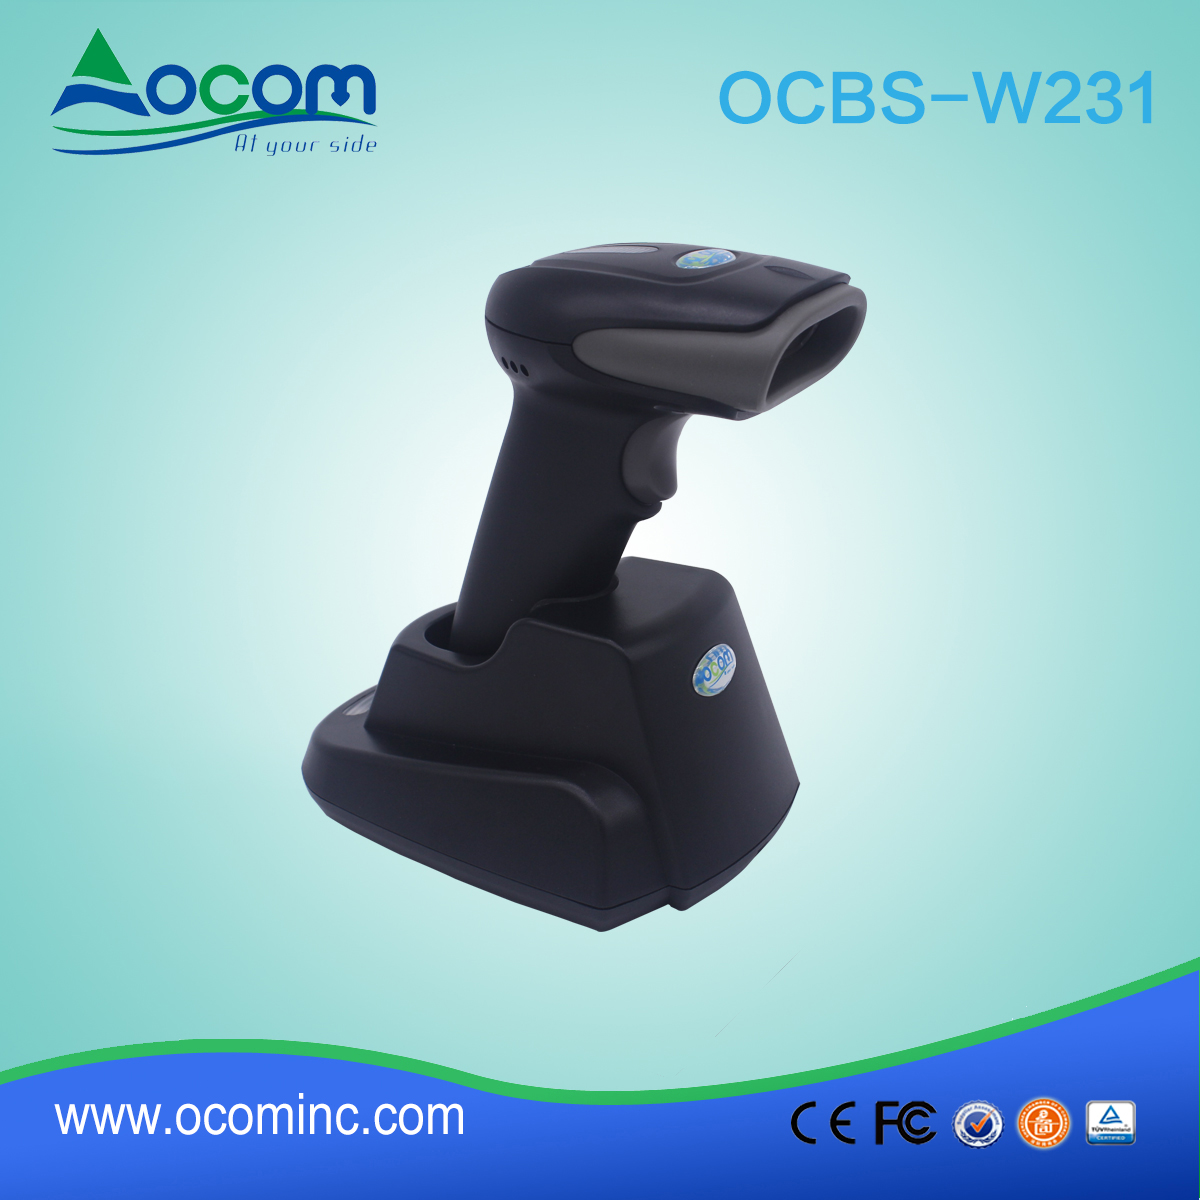 OCBS-W231 Handheld Bluetooth USB Barcode Scanner for Inventory